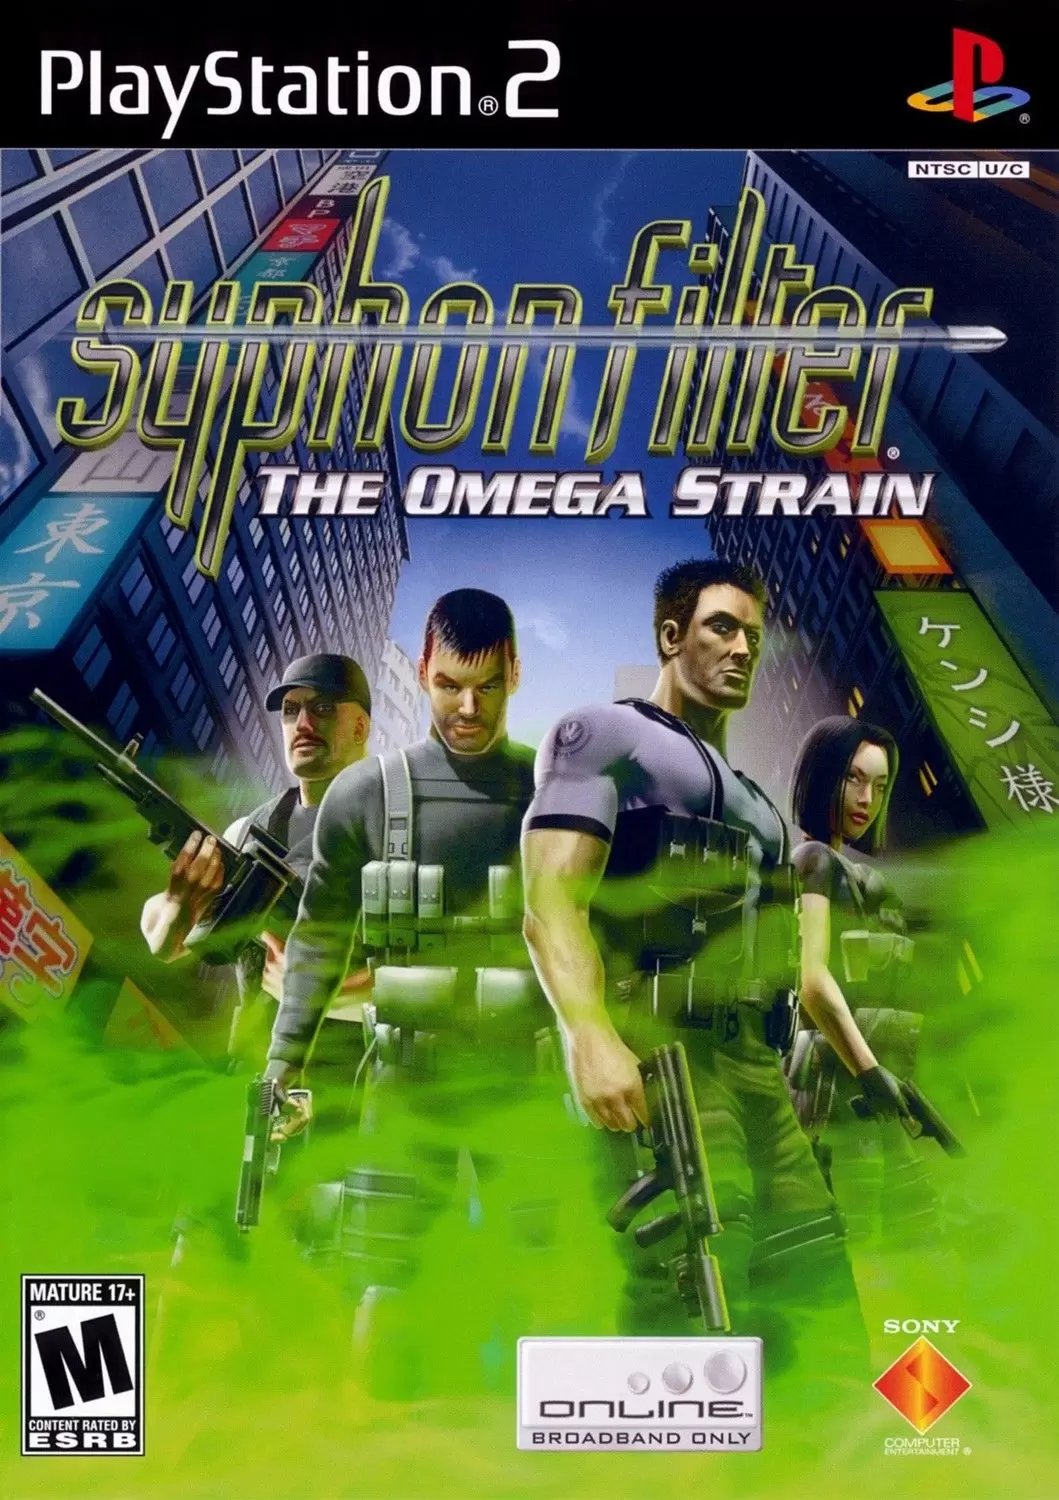 PS2 Games - Syphon Filter: The Omega Strain